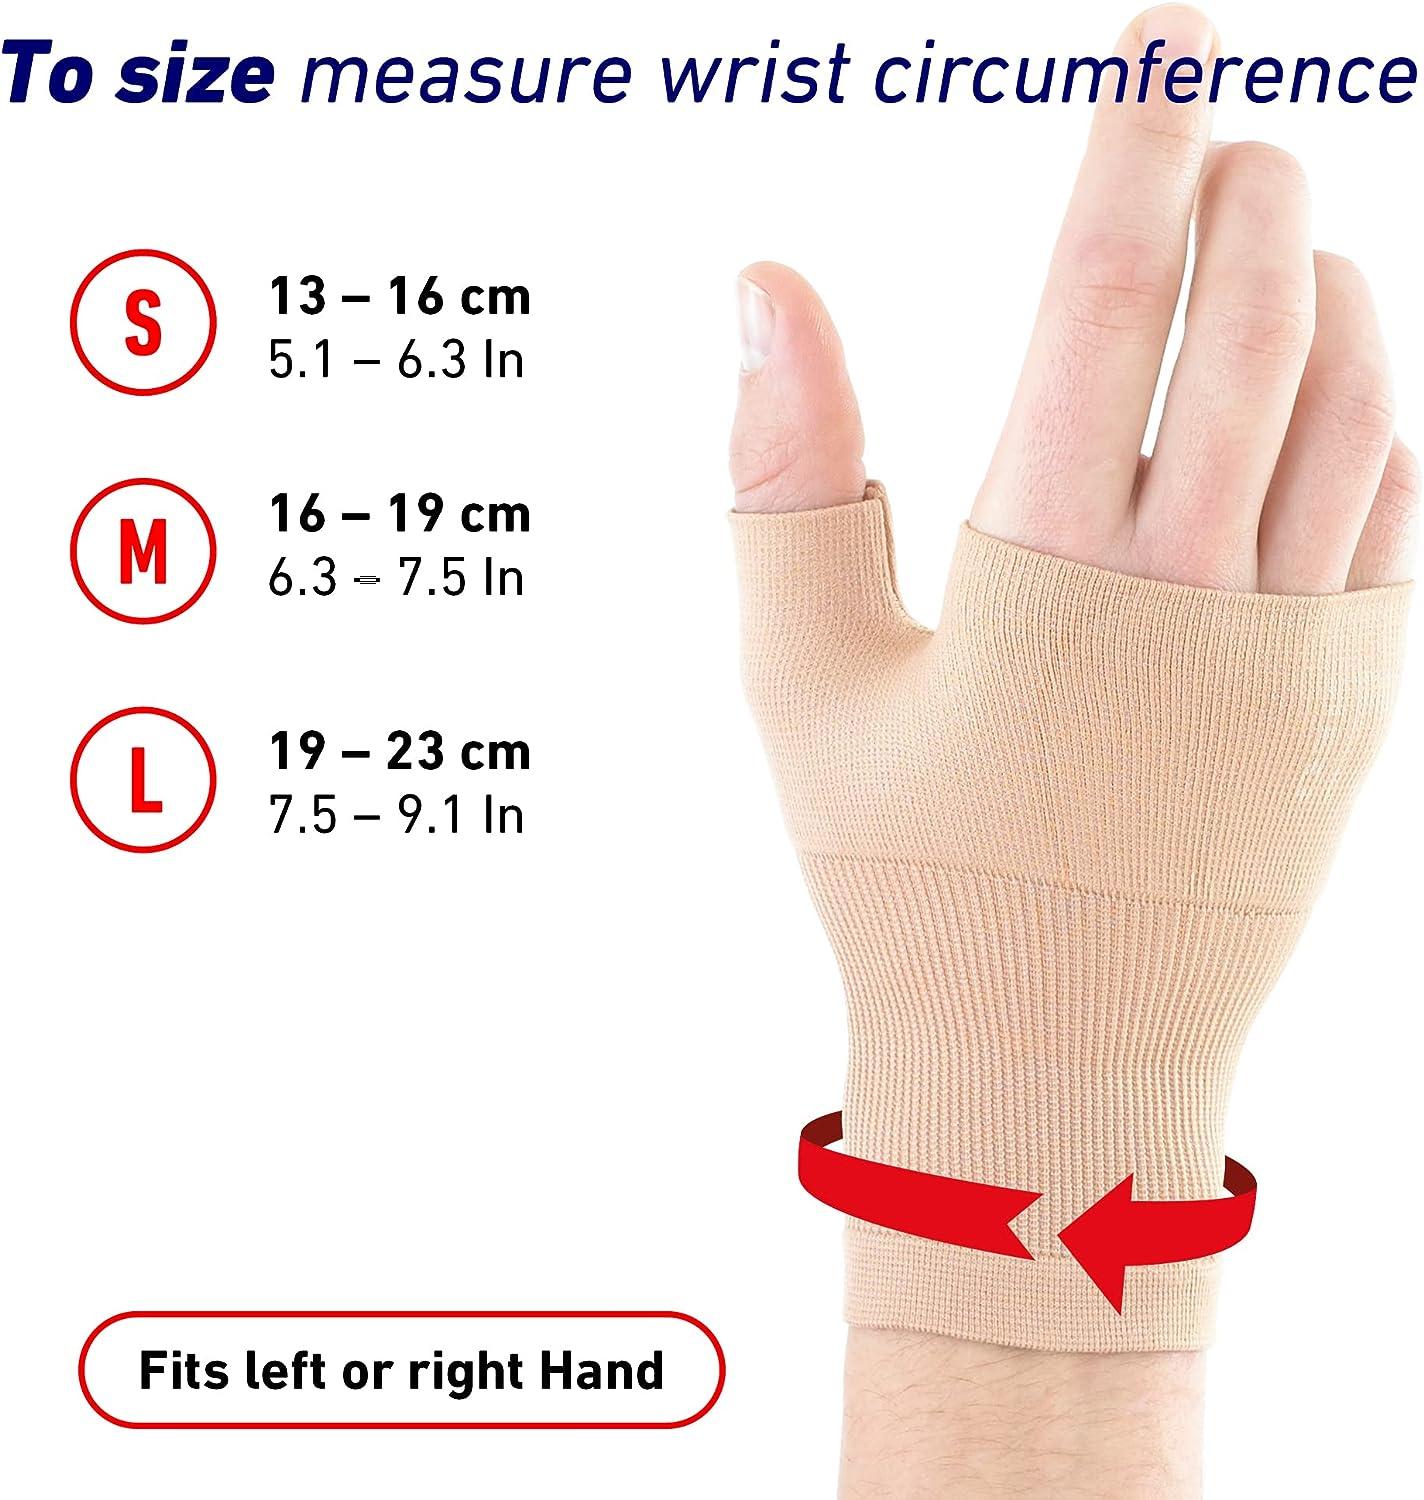 Neo G Wrist and Thumb Brace, Stabilized - Spica Support For Carpal Tunnel  Syndrome, Arthritis, Tendonitis, Joint Pain - Adjustable Compression -  Class